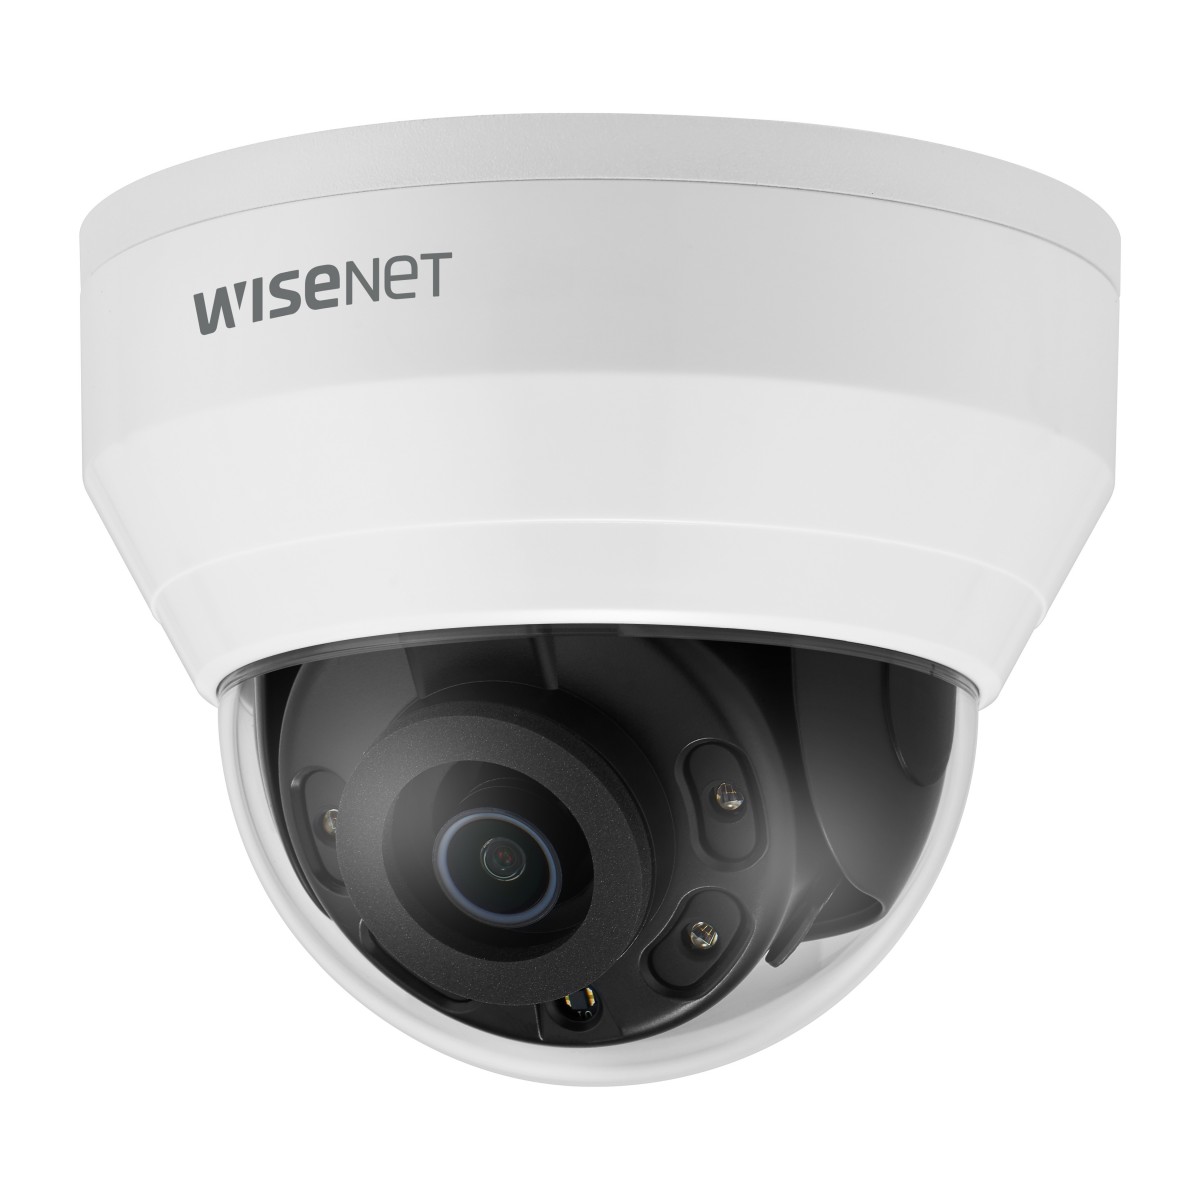 Hanwha Techwin Hanwha QND-8010R - IP security camera - Outdoor - Wired - Simplified Chinese - Traditional Chinese - Czech - Germ